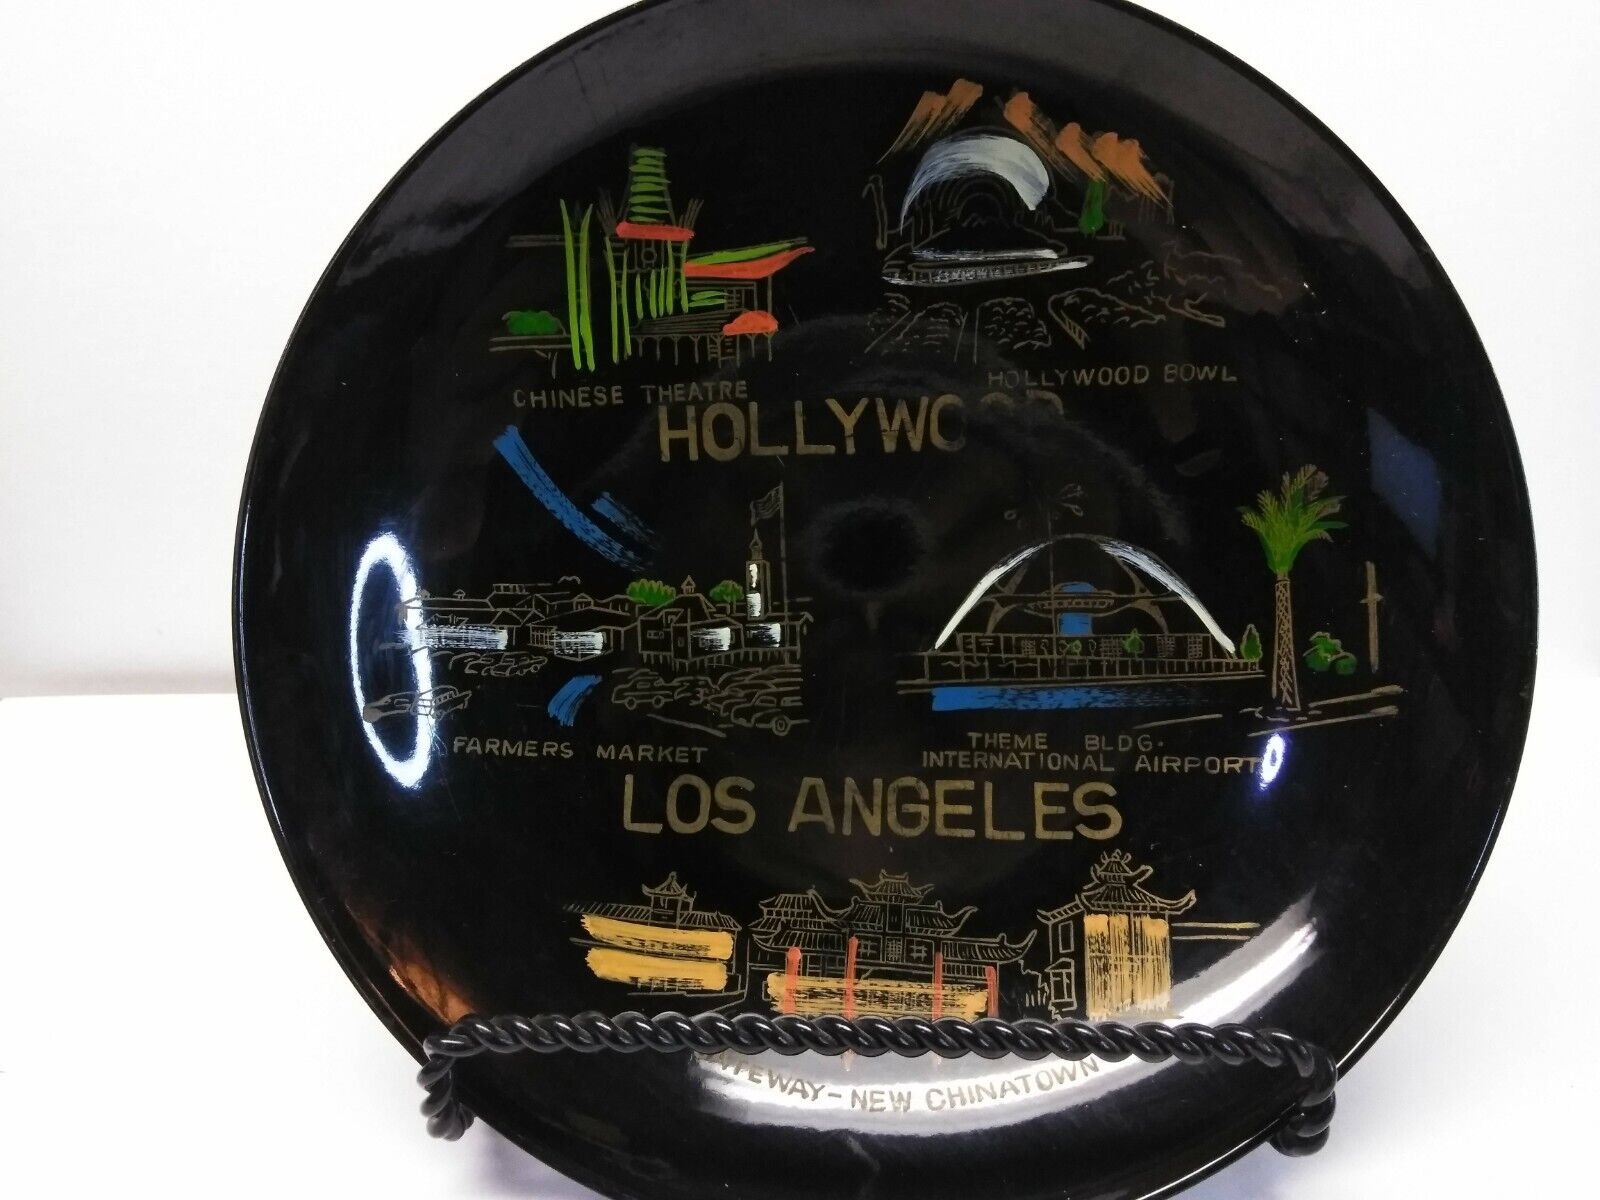 Vintage California Bowl - Los Angeles, Hollywood, New Chinatown, Chinese Theatre